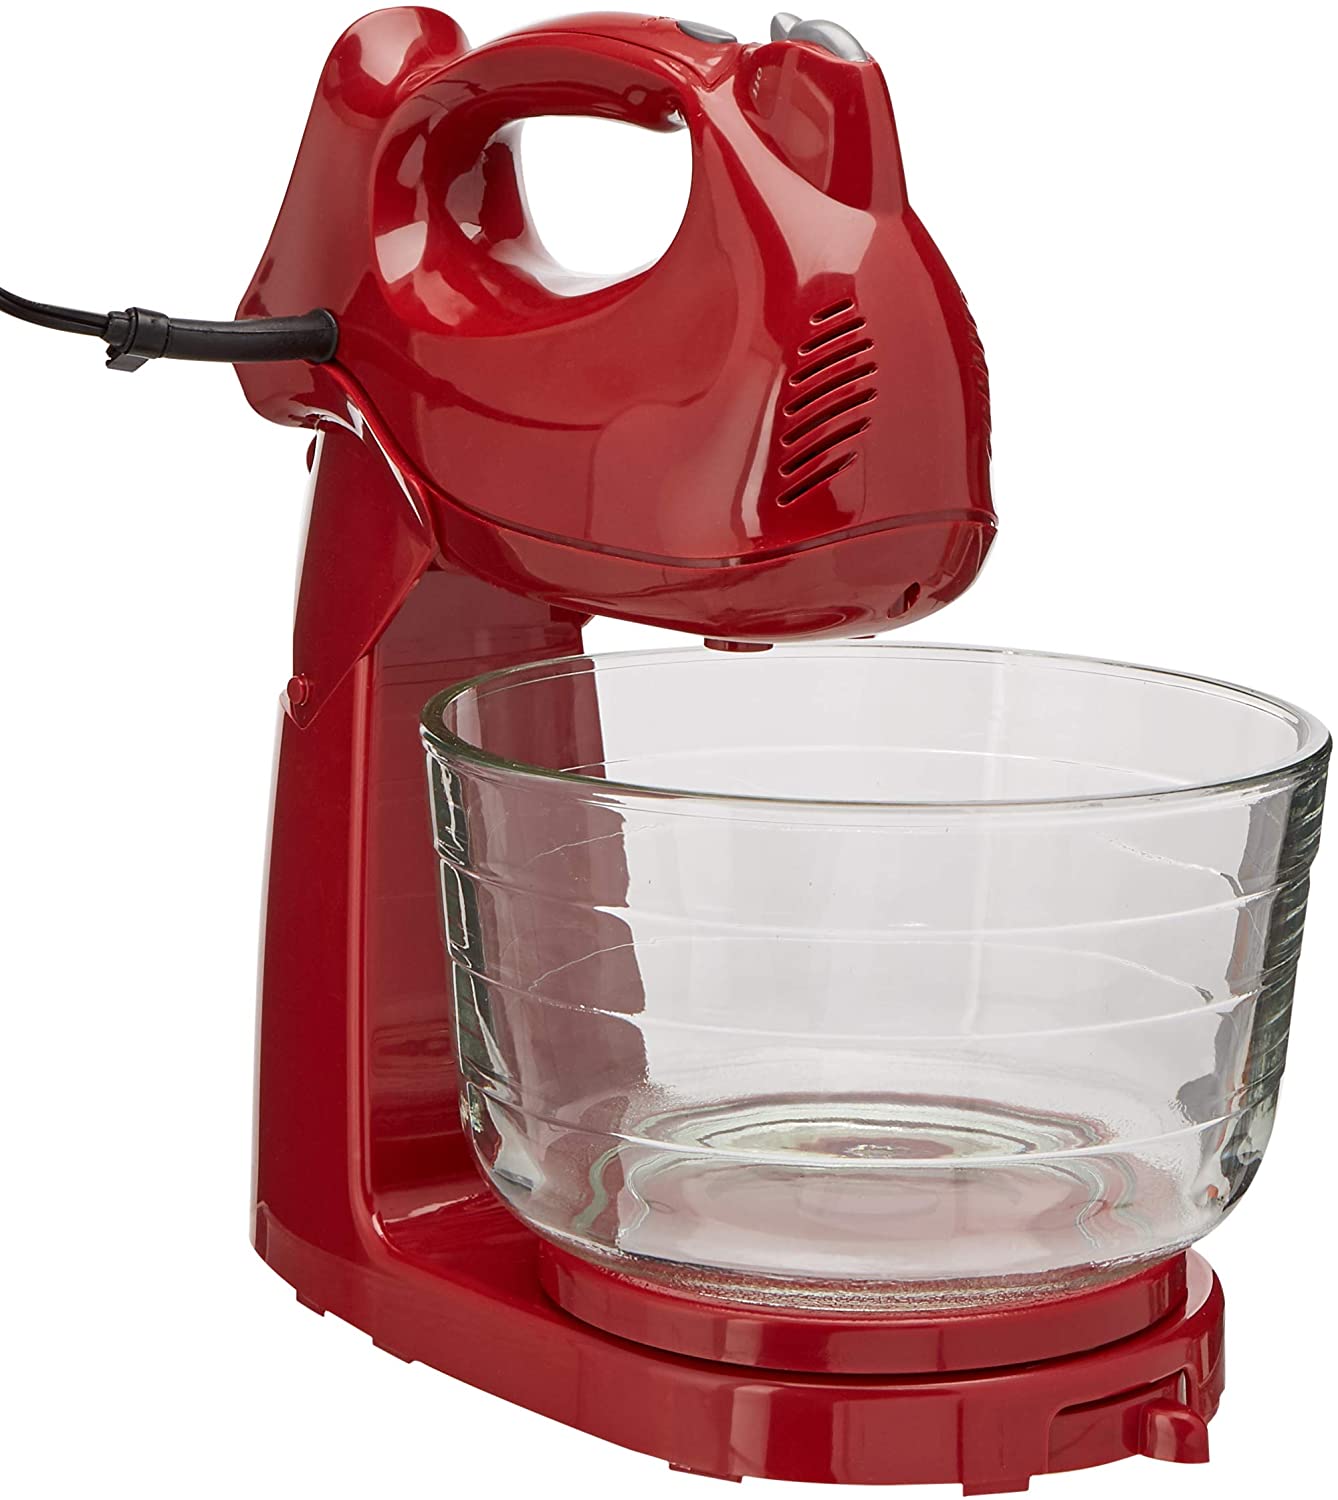 Hamilton Beach Power Deluxe Stand and Hand Mixer, 6 Speeds, 4 Quarts, Red,  64699